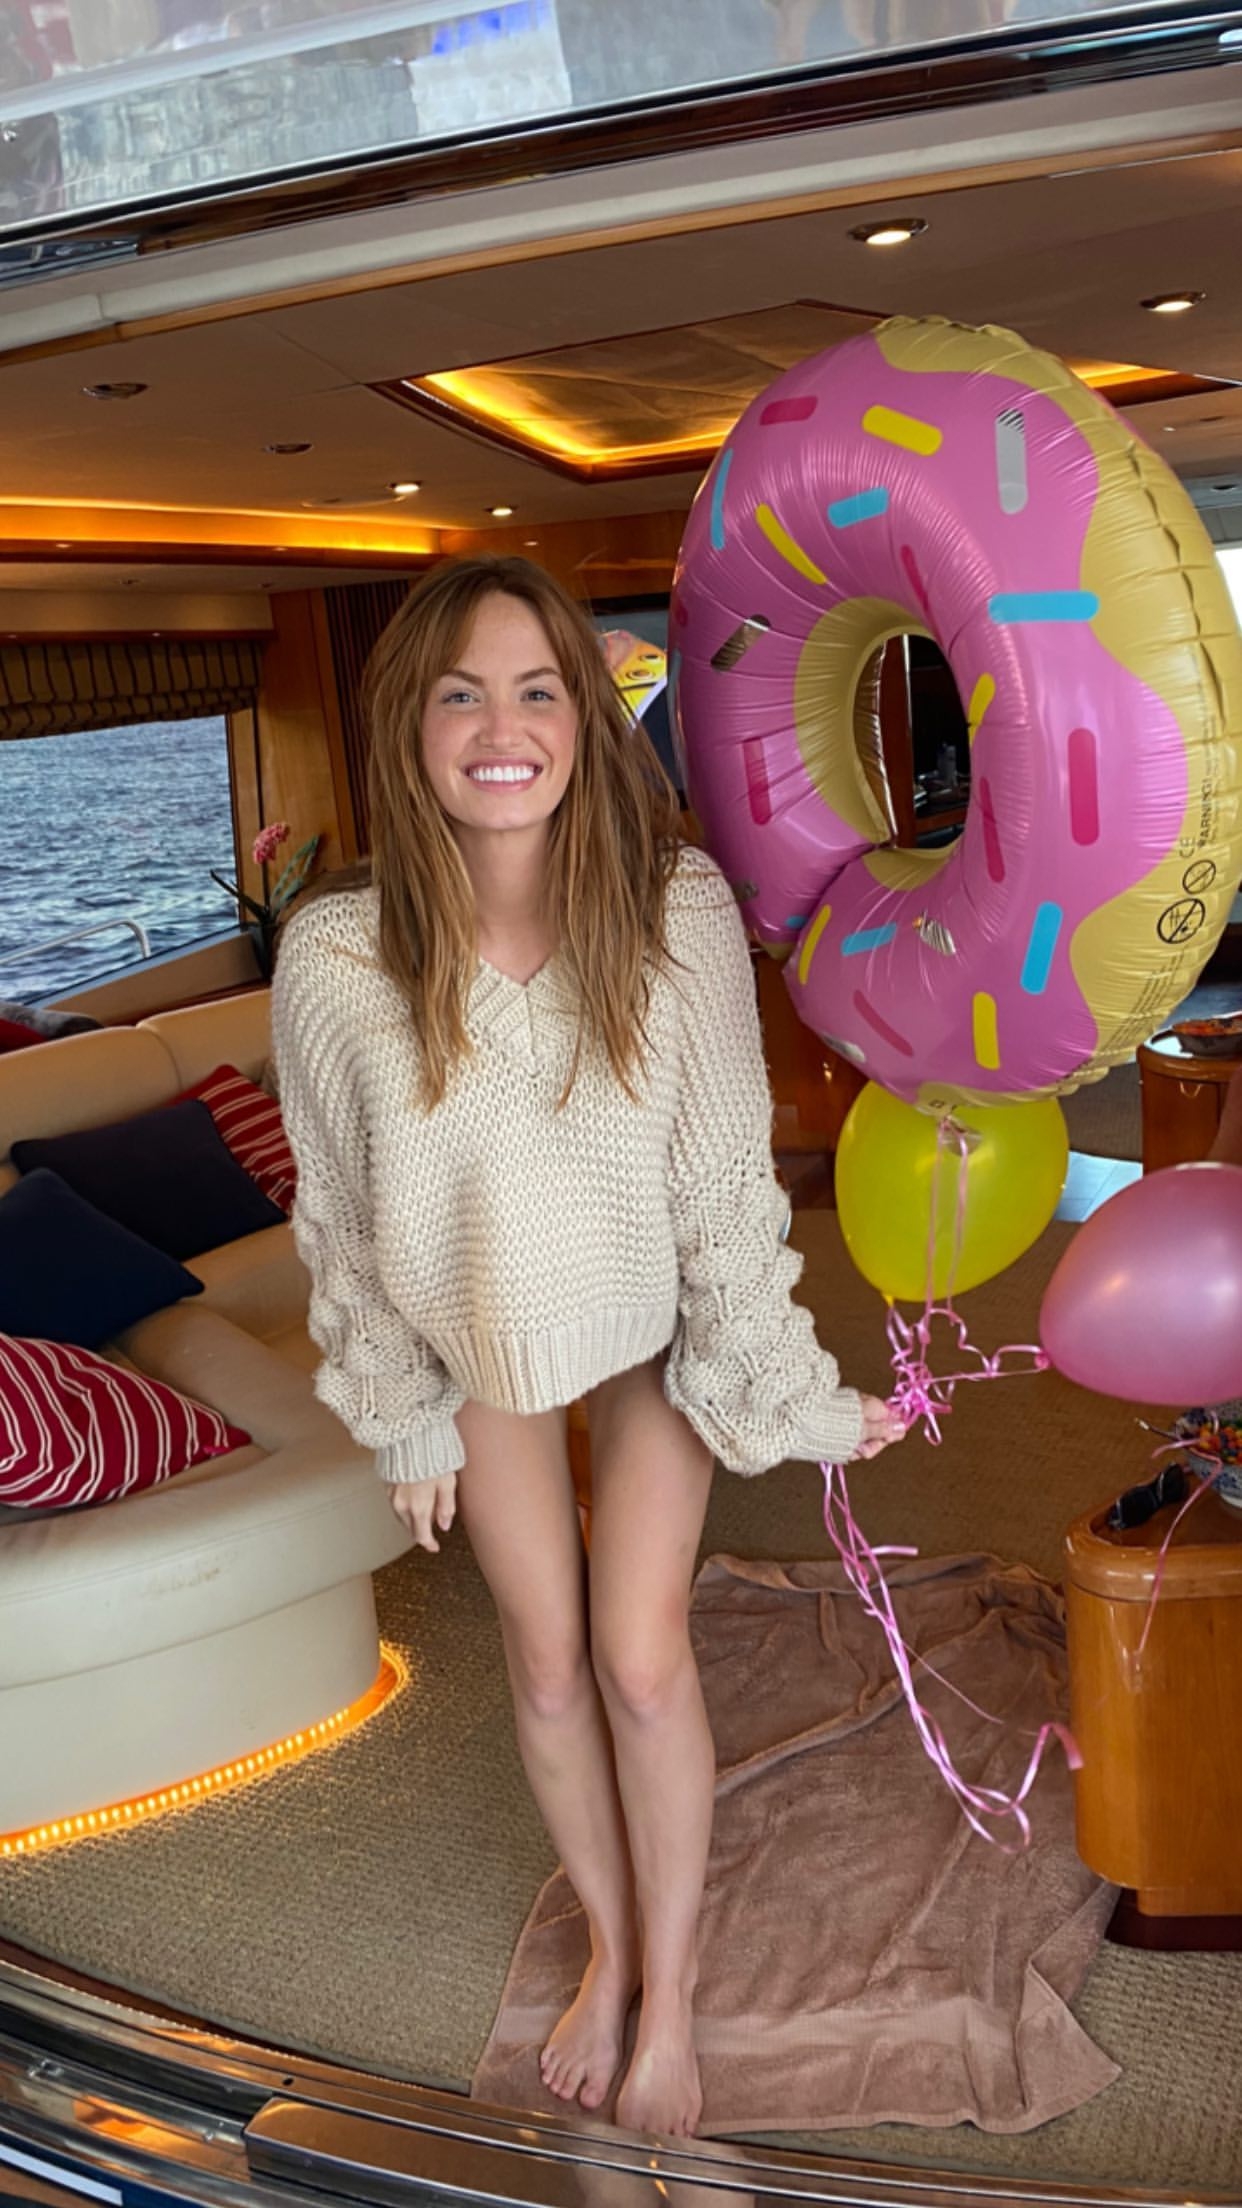 Haley Kalil Puts on a Boat Show! - Photo 7